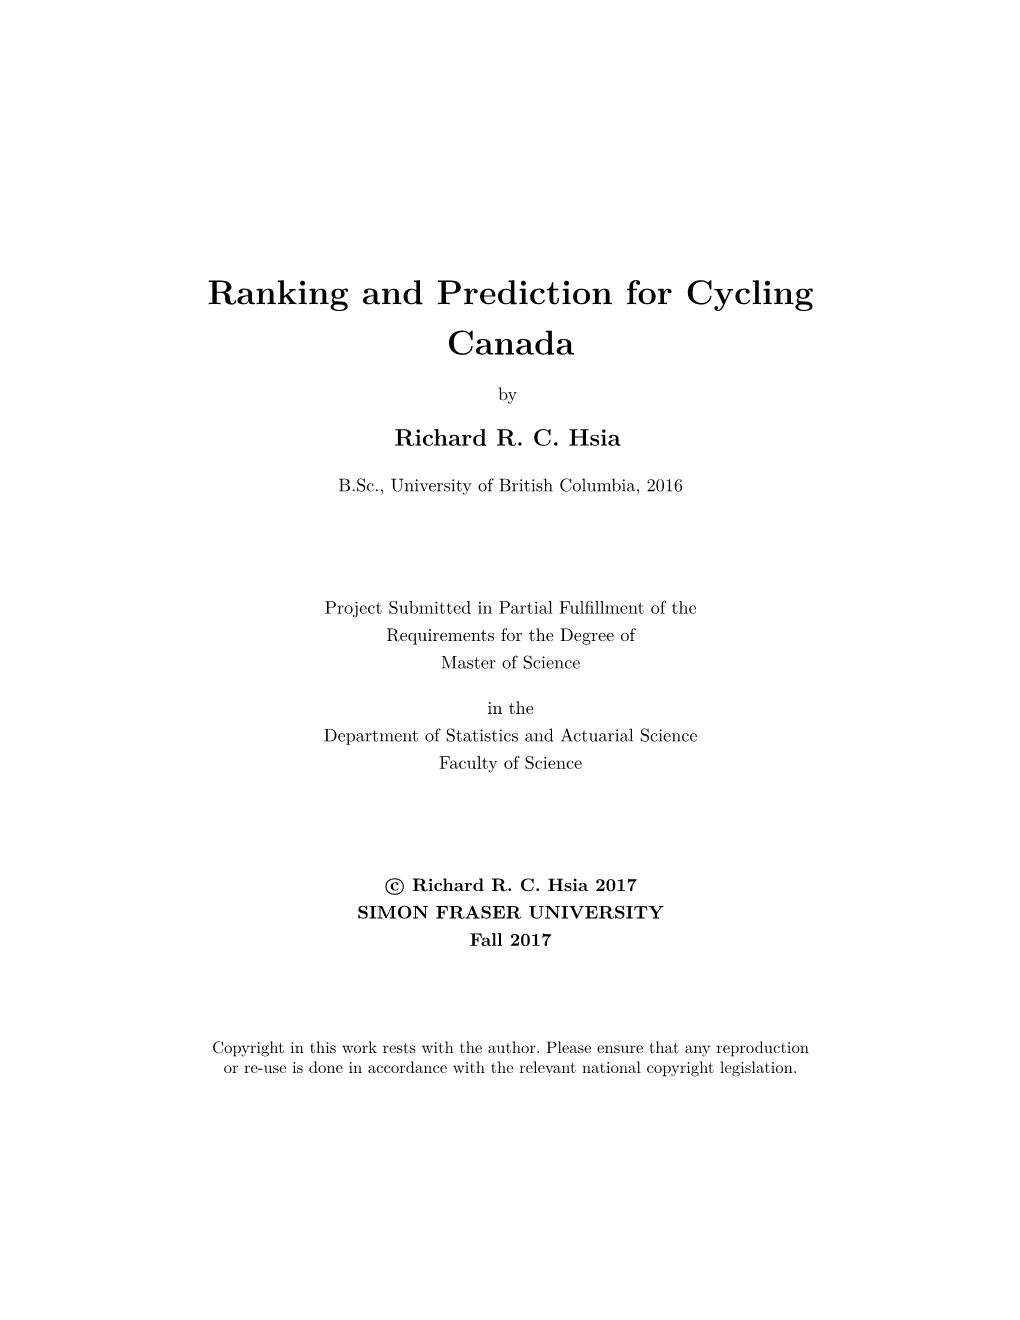 Ranking and Prediction for Cycling Canada